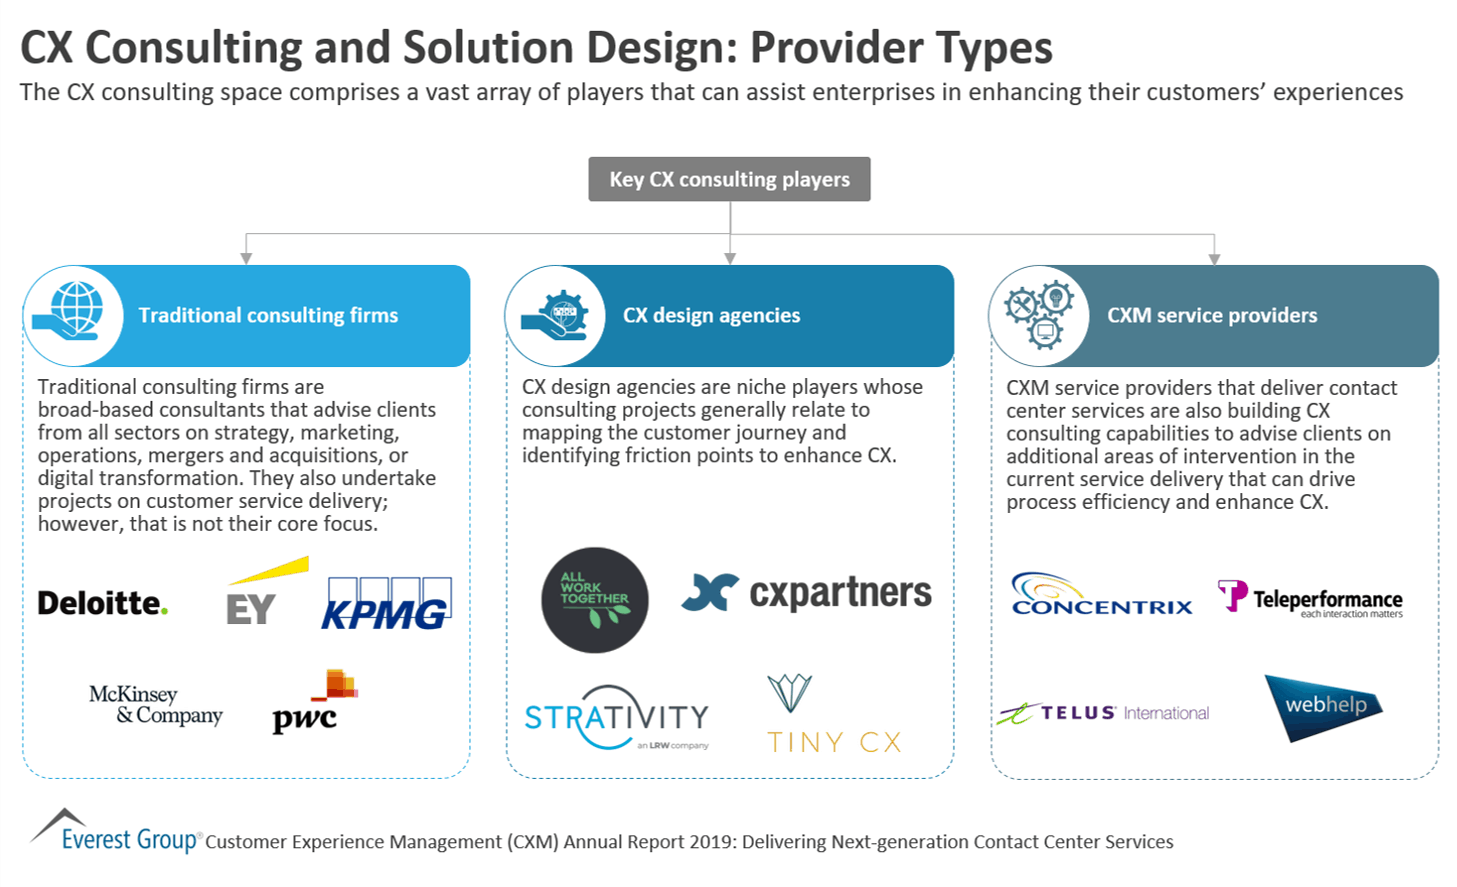 CX Consulting and Solution Design - Provider Types